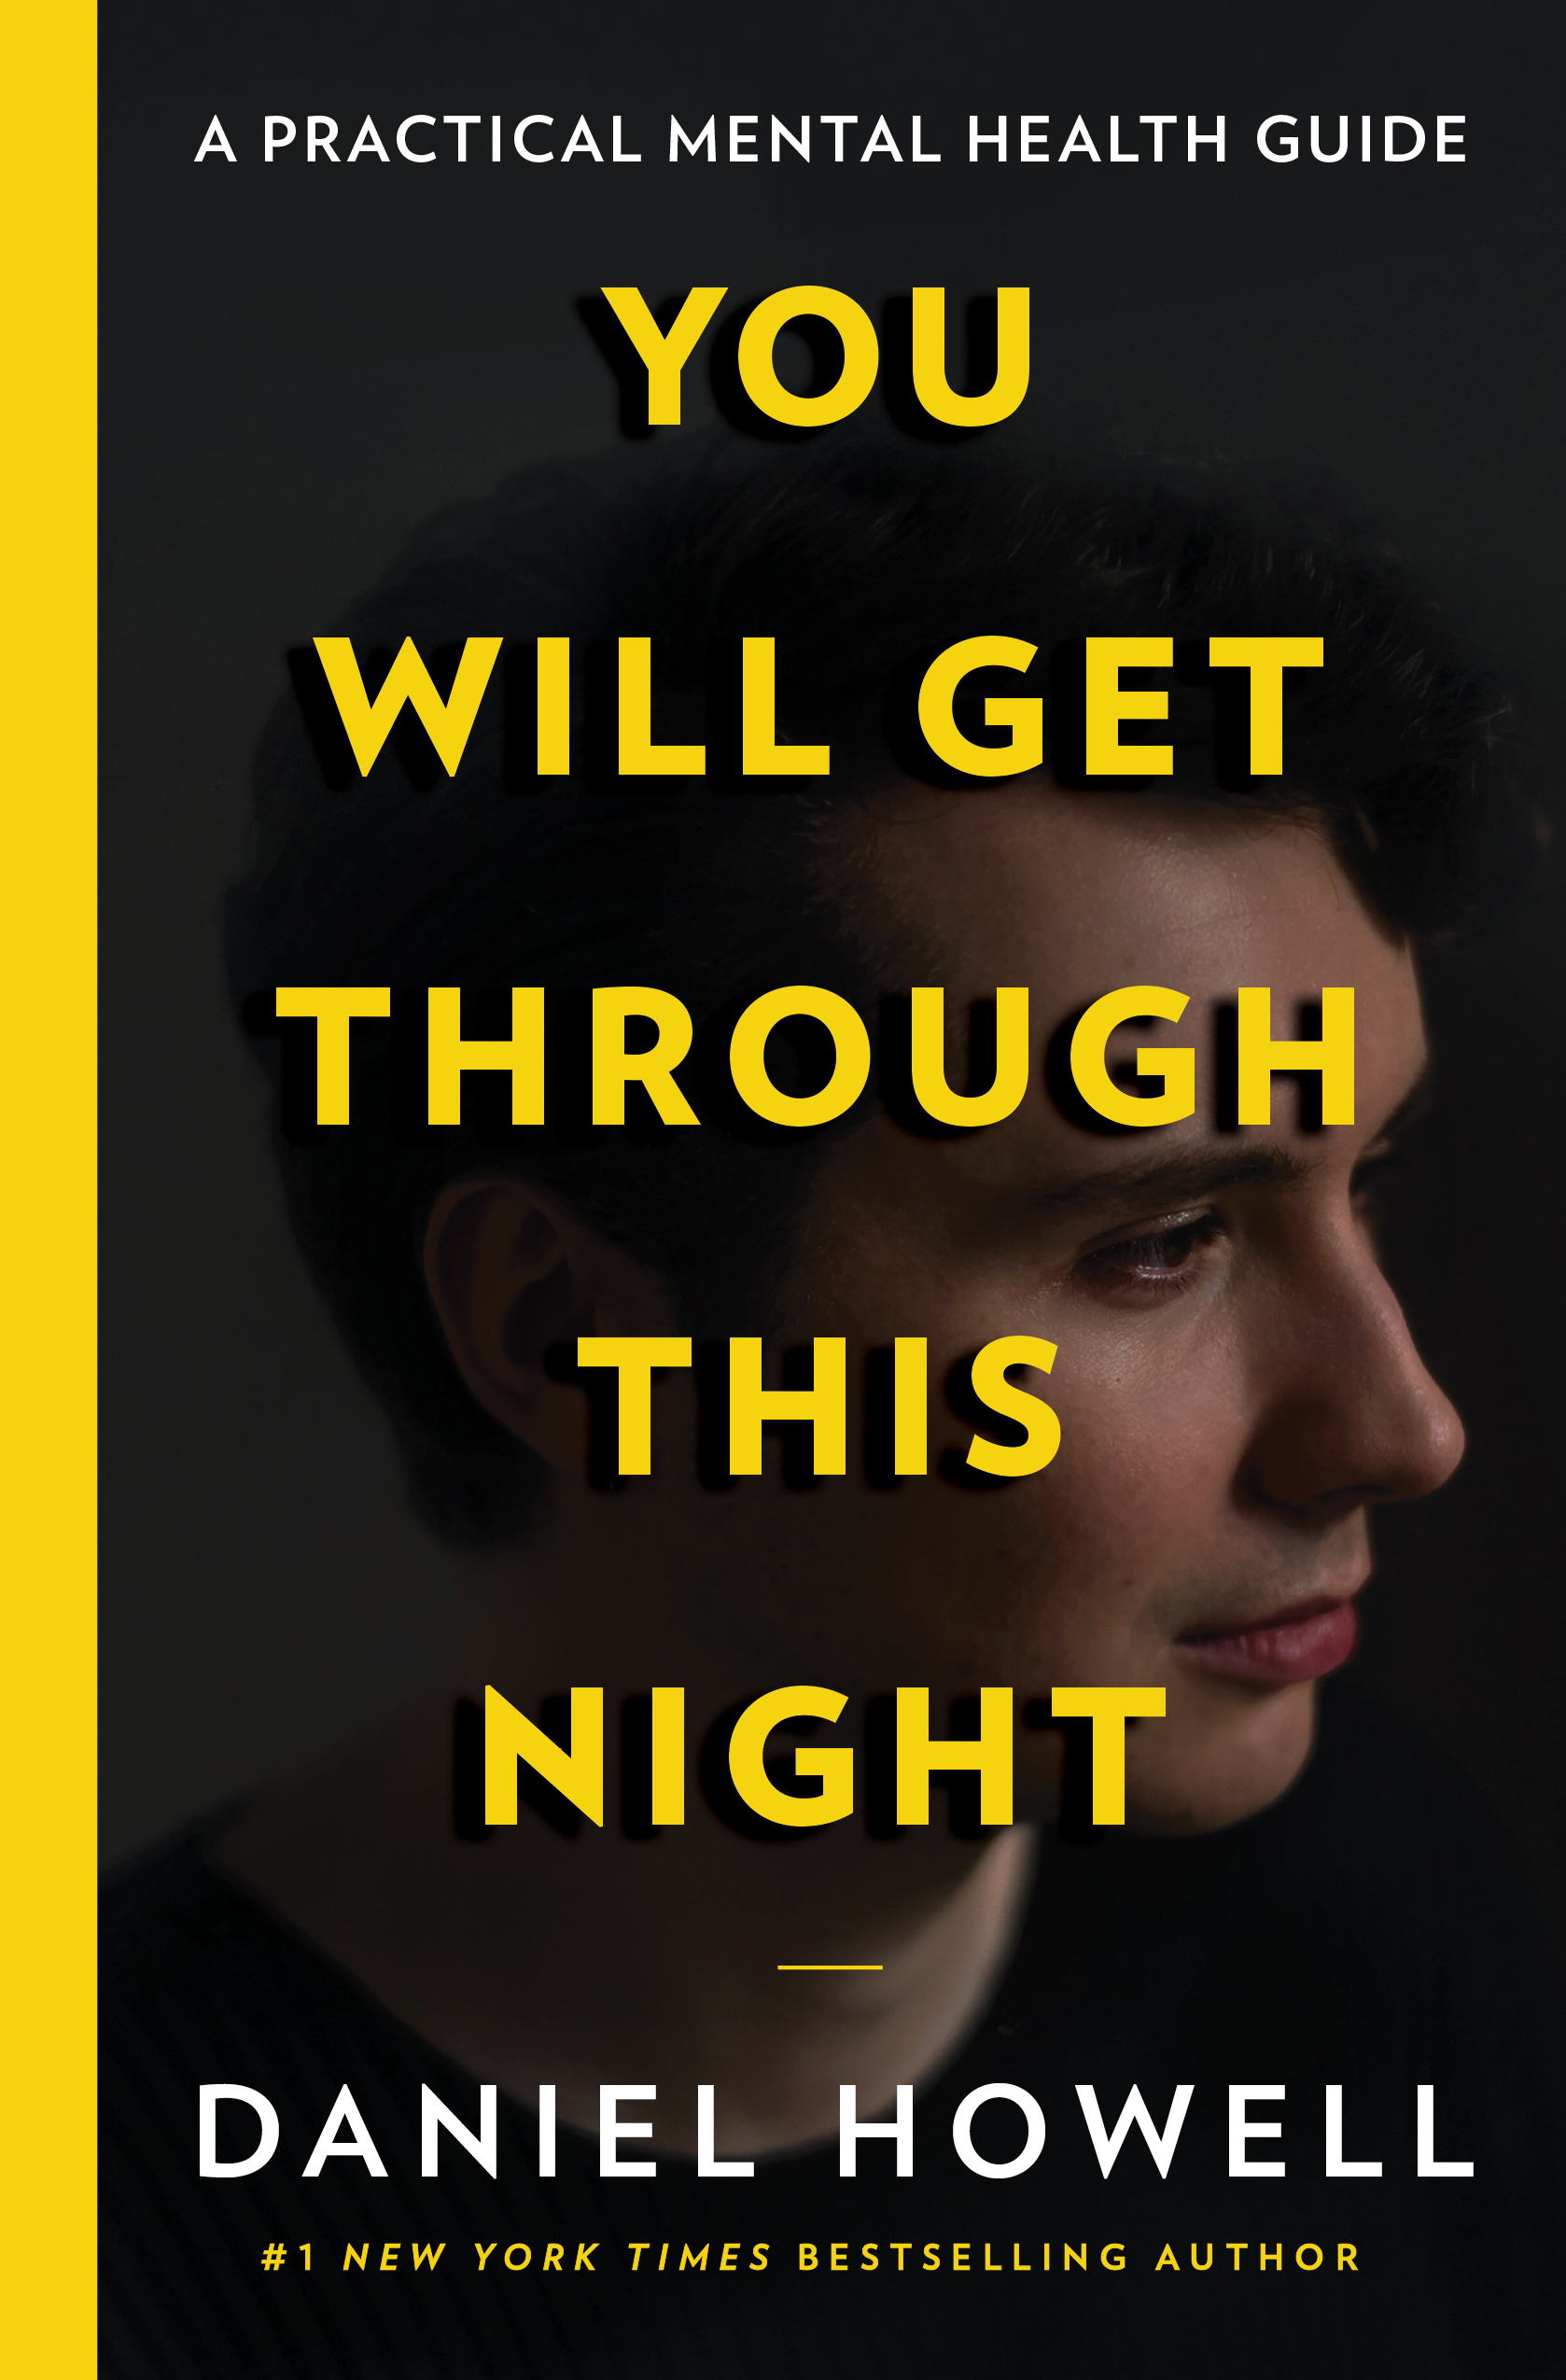 Virtual event with Daniel Howell/You Will Get Through This Night